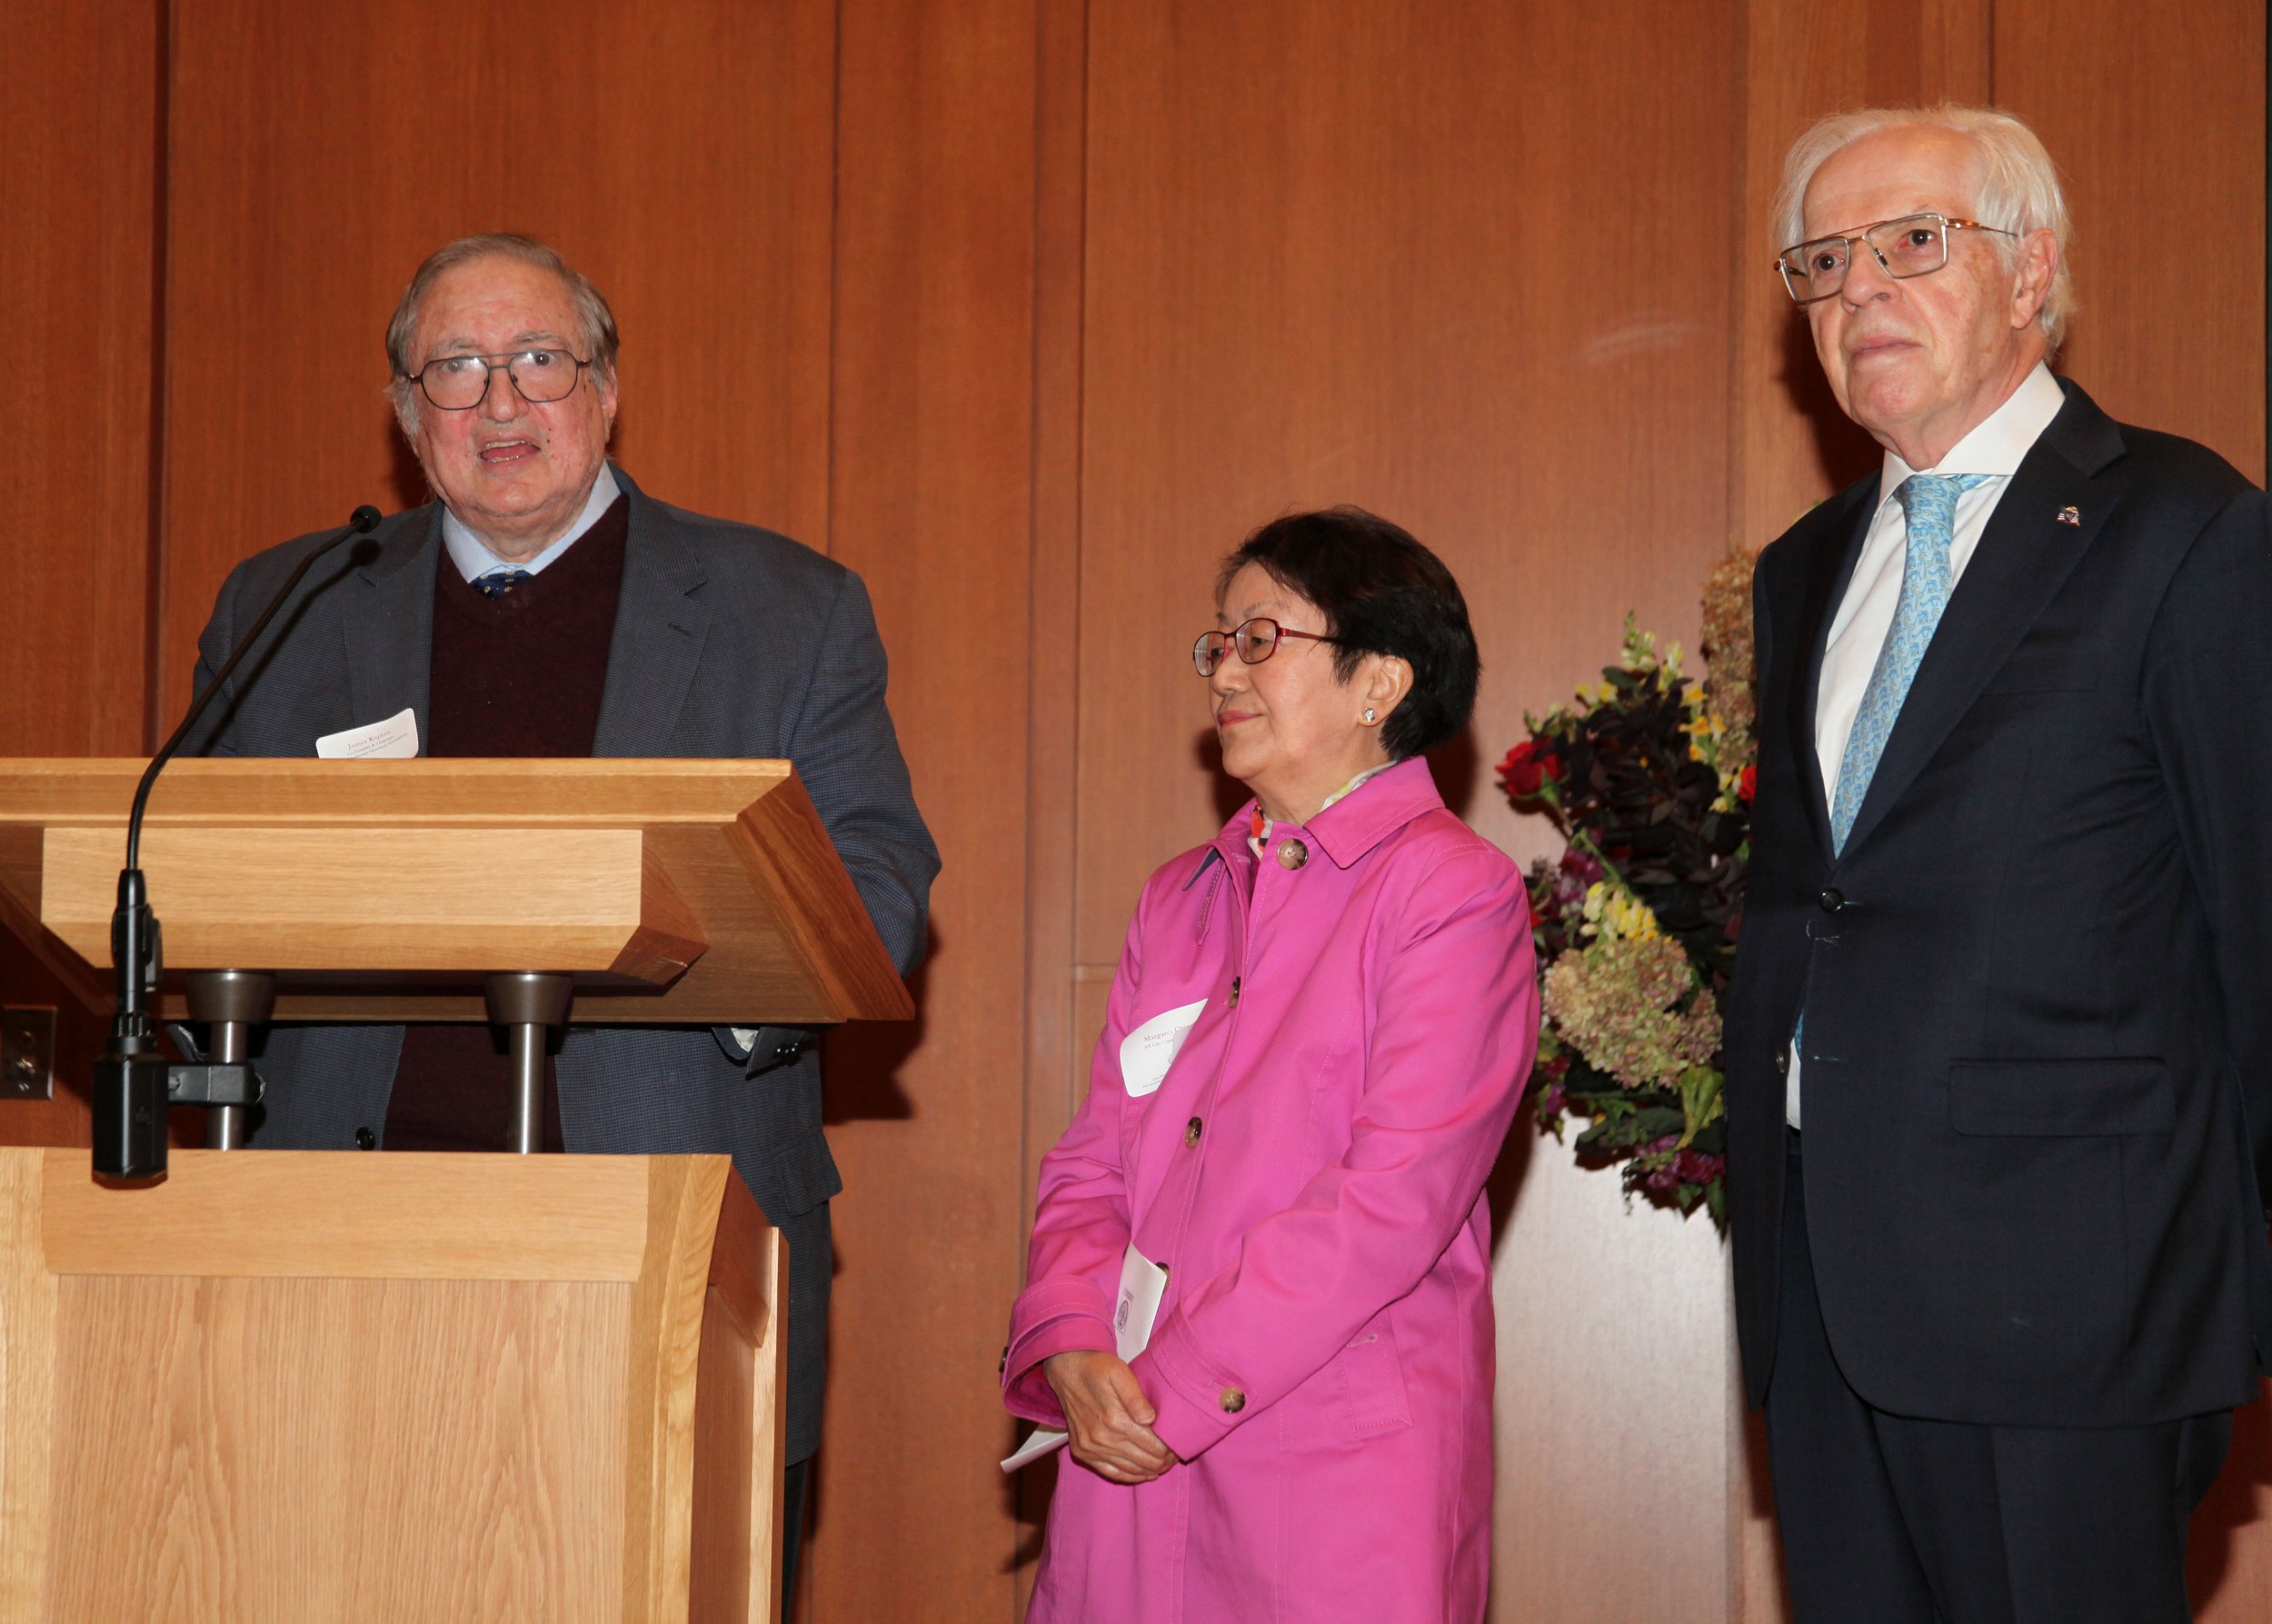   James S. Kaplan , Co-Founder and Chairman Lower Manhattan Historical Association, 2016 Awardee  Margaret Chin , former NY City Council Member, and  Jean Claude Gruffat , 2018 Awardee and Investment Banker 